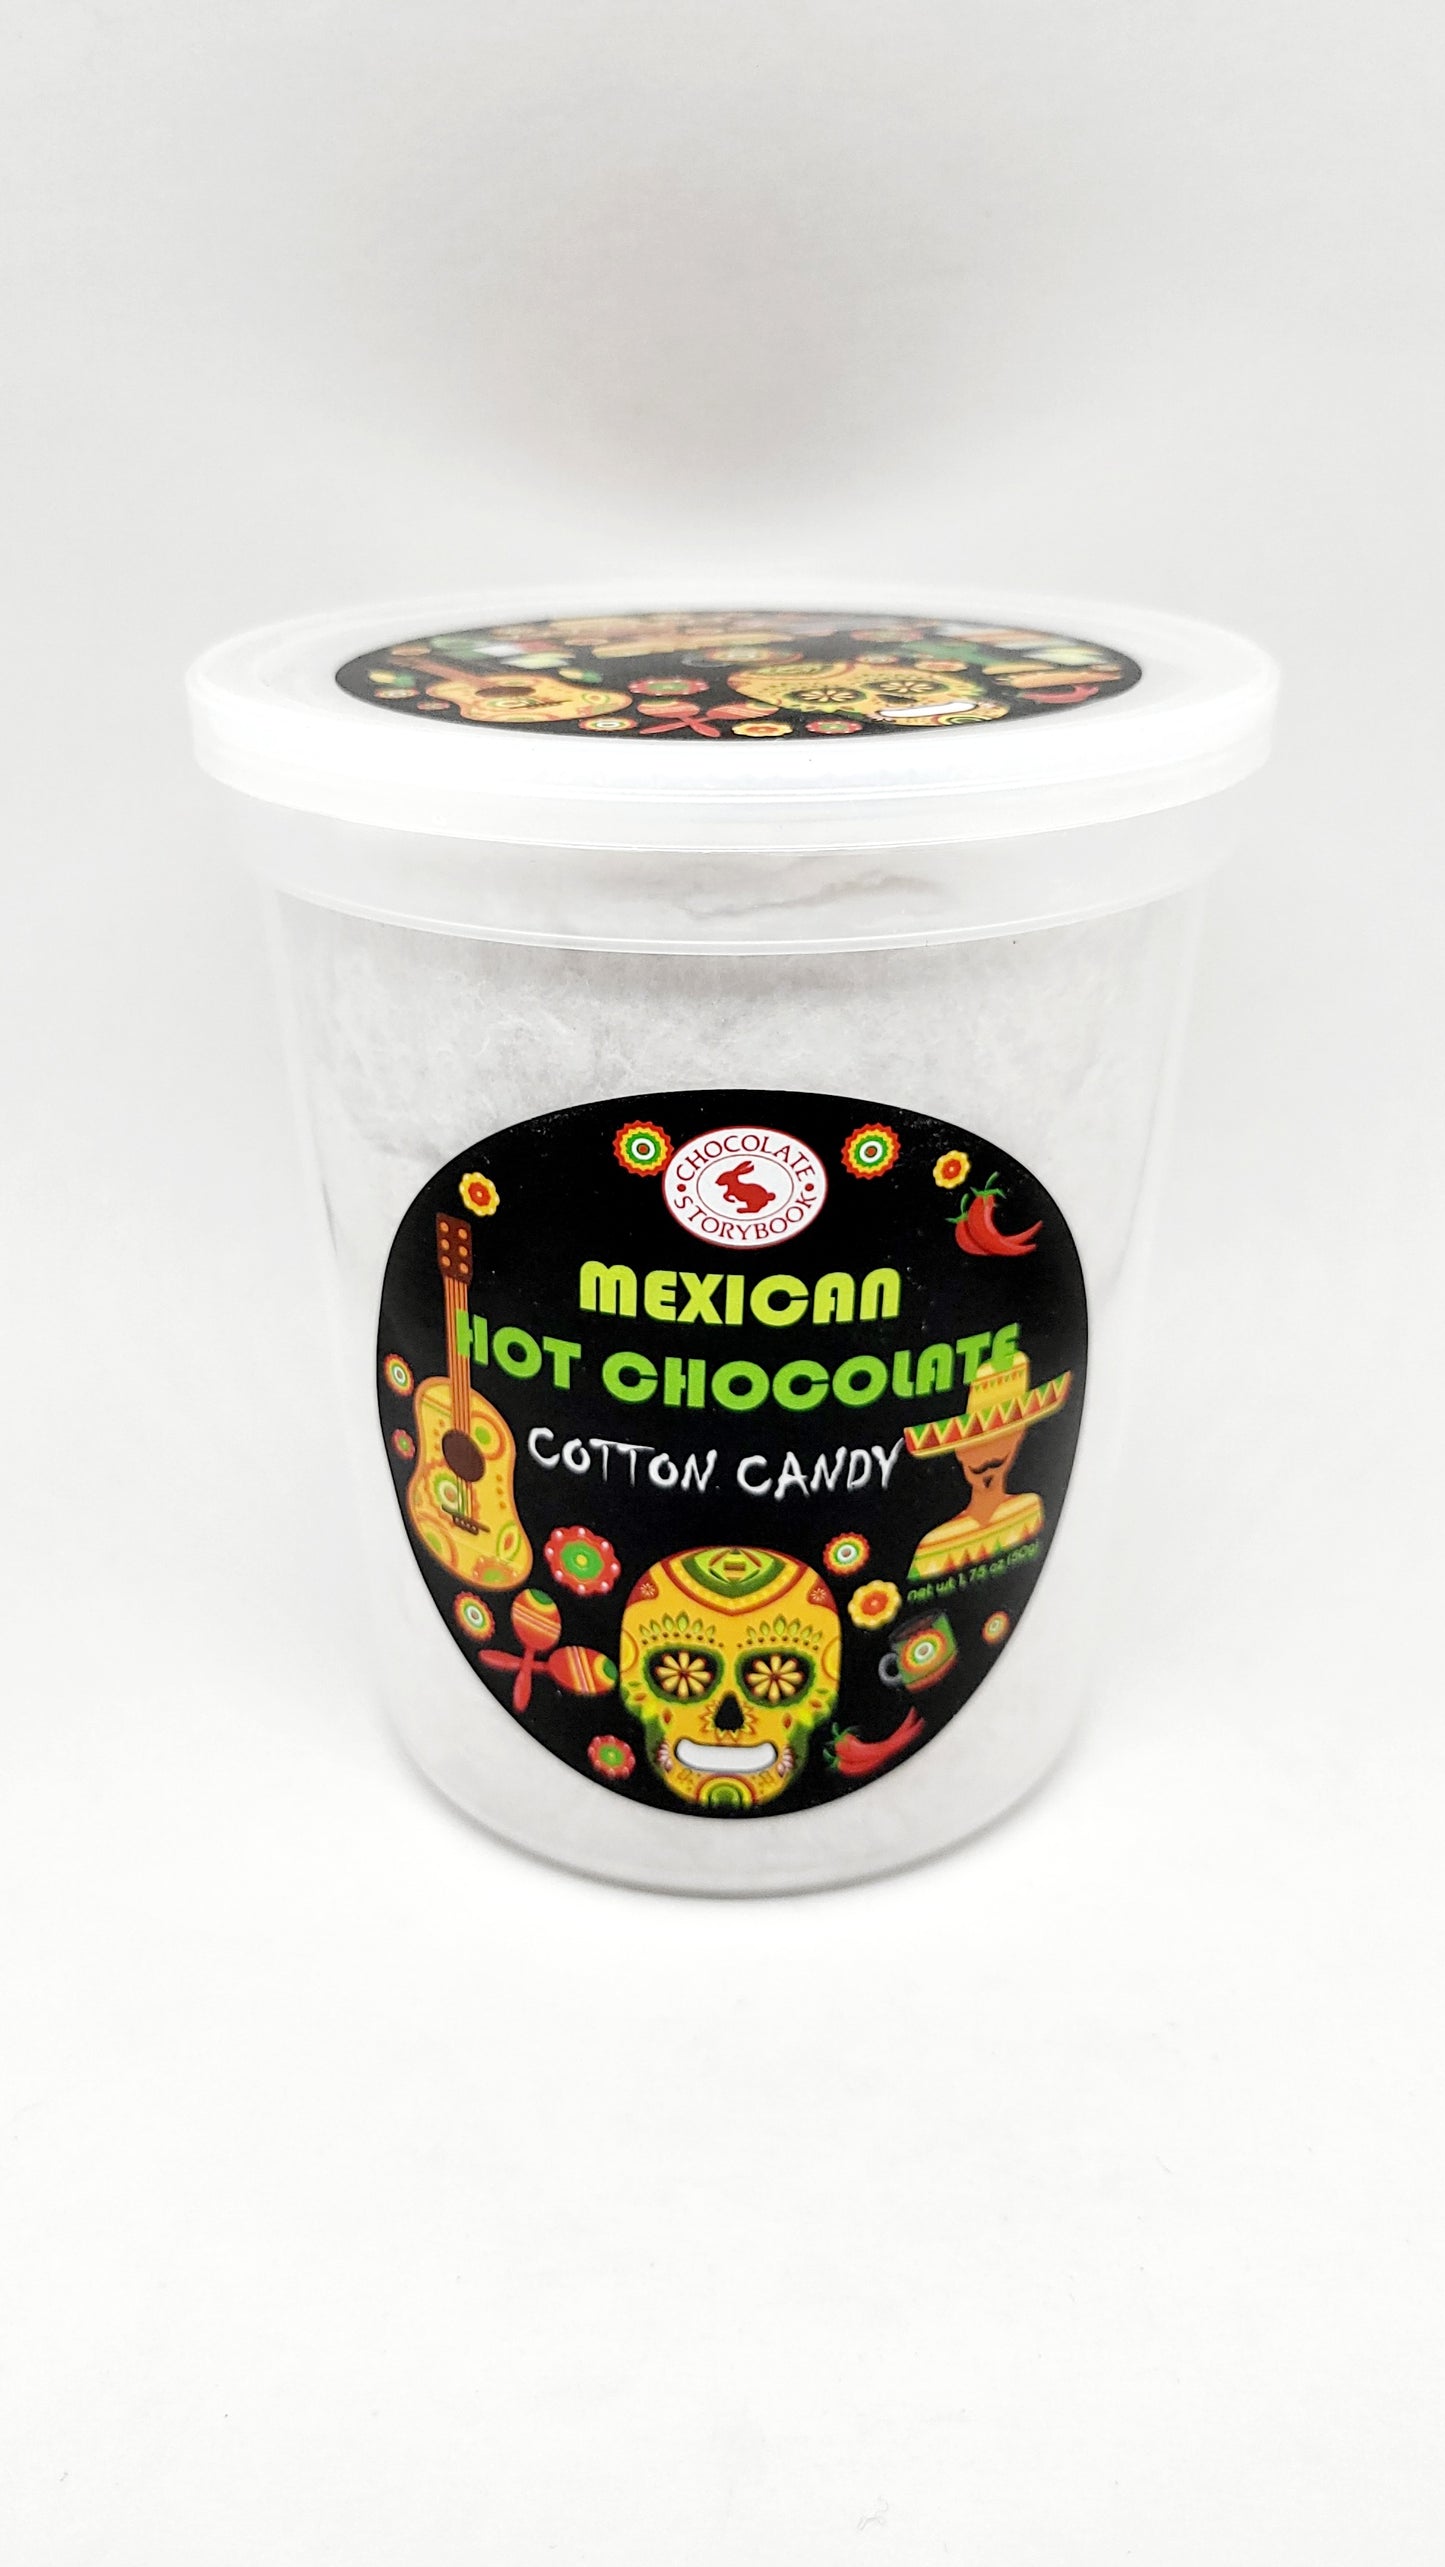 Mexican Hot Chocolate Cotton Candy 1.75 oz